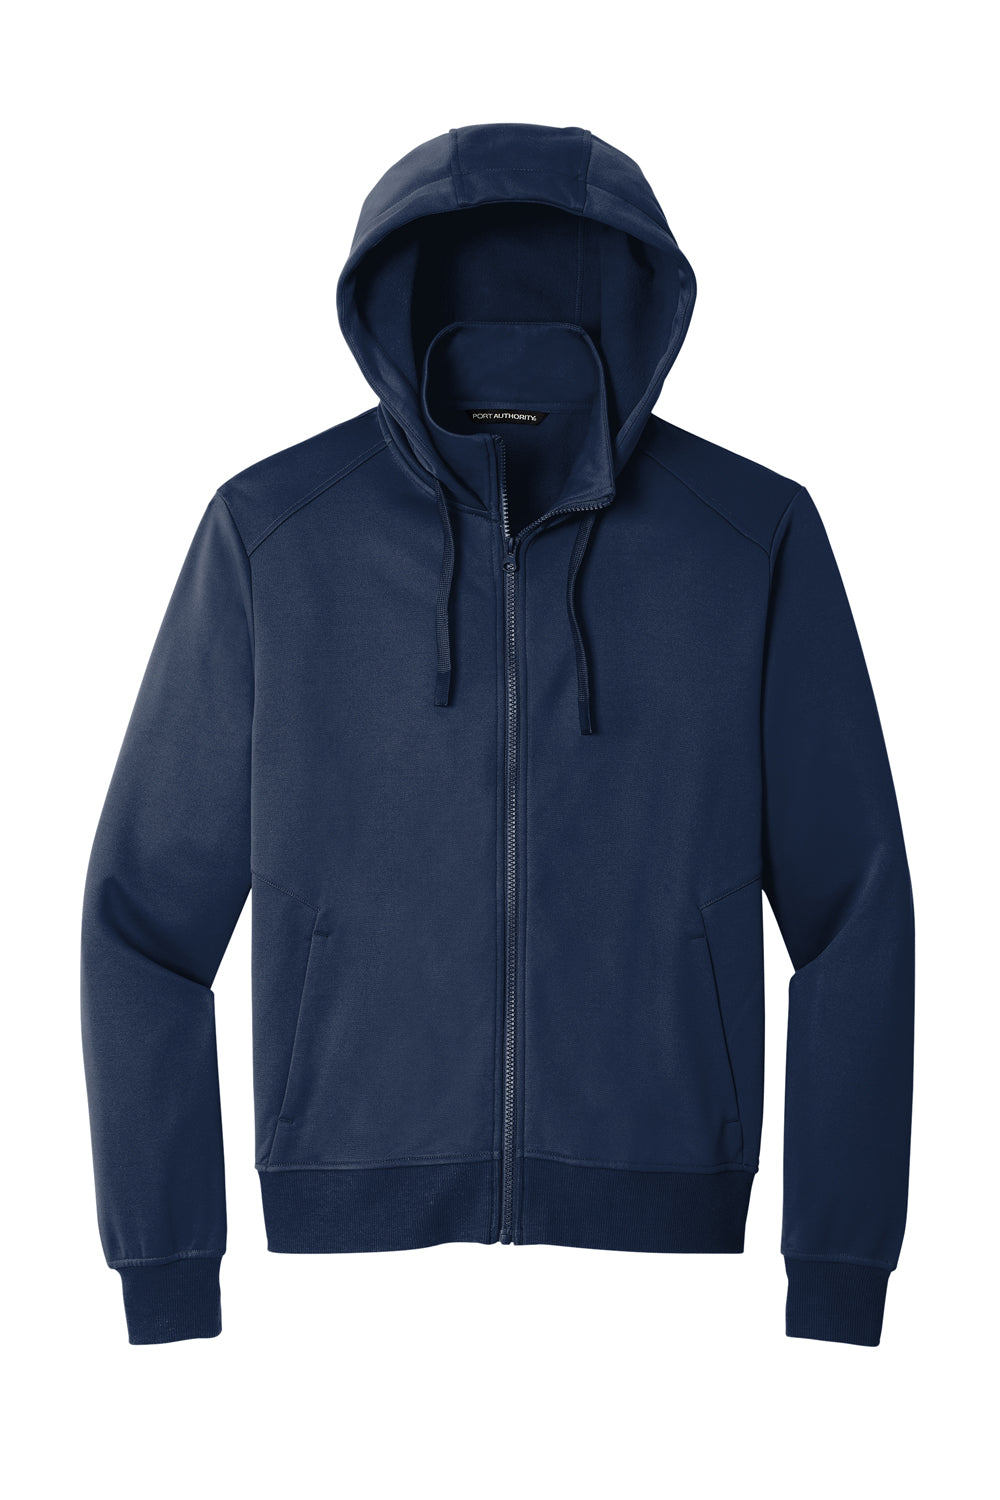 Port Authority F814 Mens Smooth Fleece Full Zip Hooded Jacket River Navy Blue Flat Front